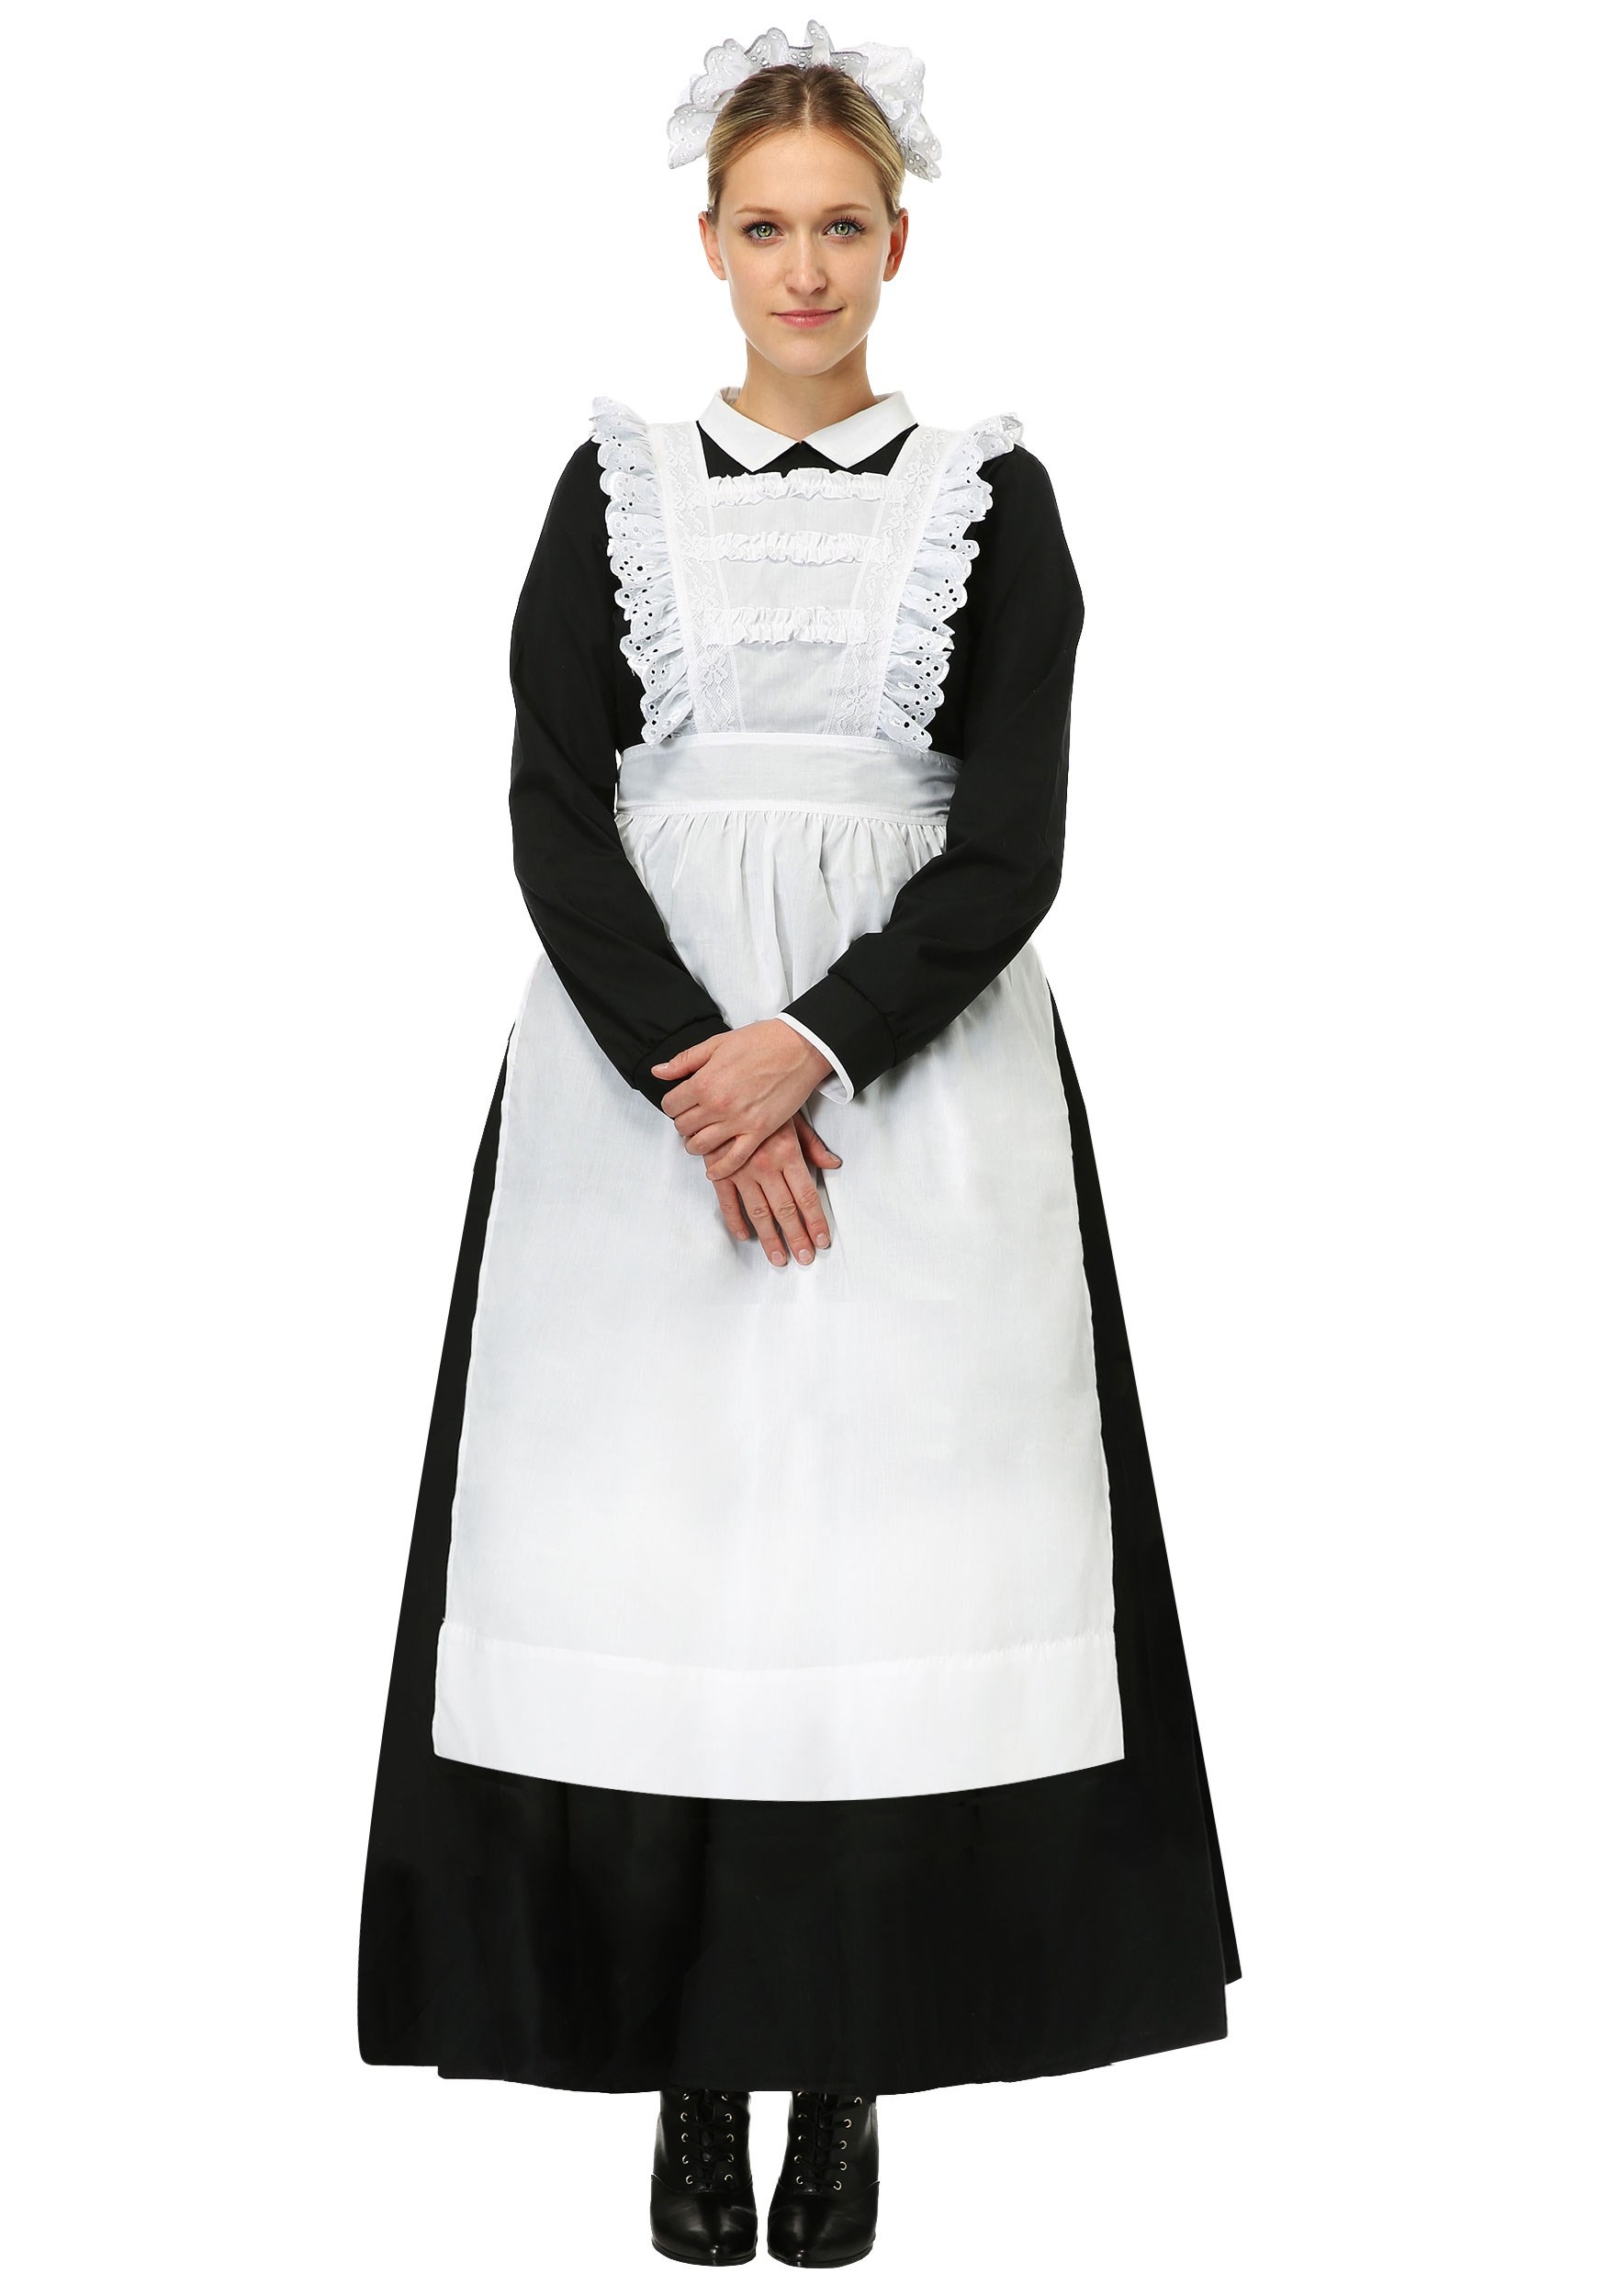 Image of Traditional Plus Size Maid Costume for Women ID FUN1520PL-2X